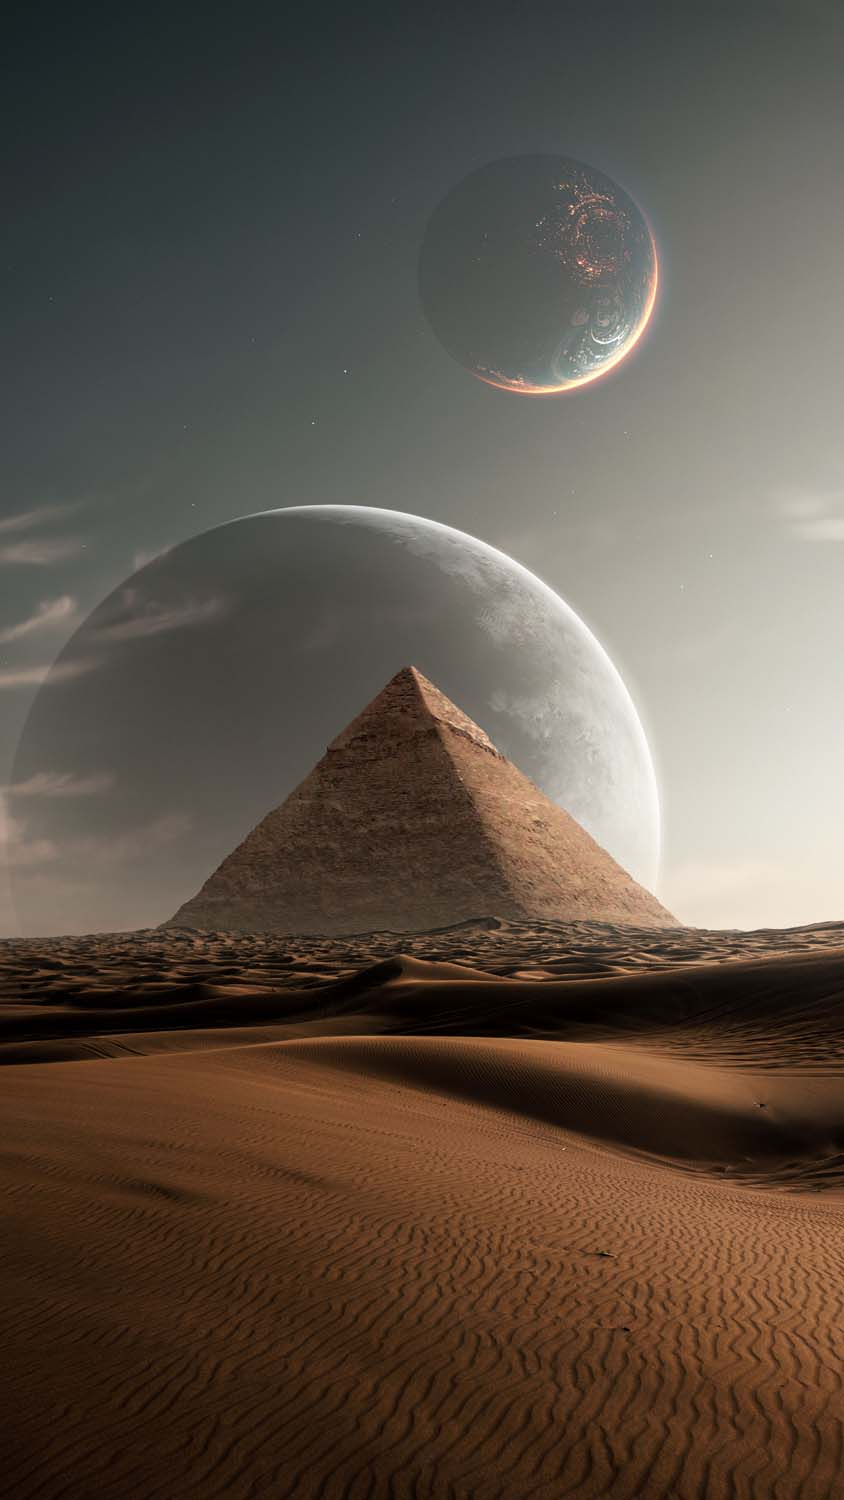 Space Pyramid IPhone Wallpaper HD  IPhone Wallpapers